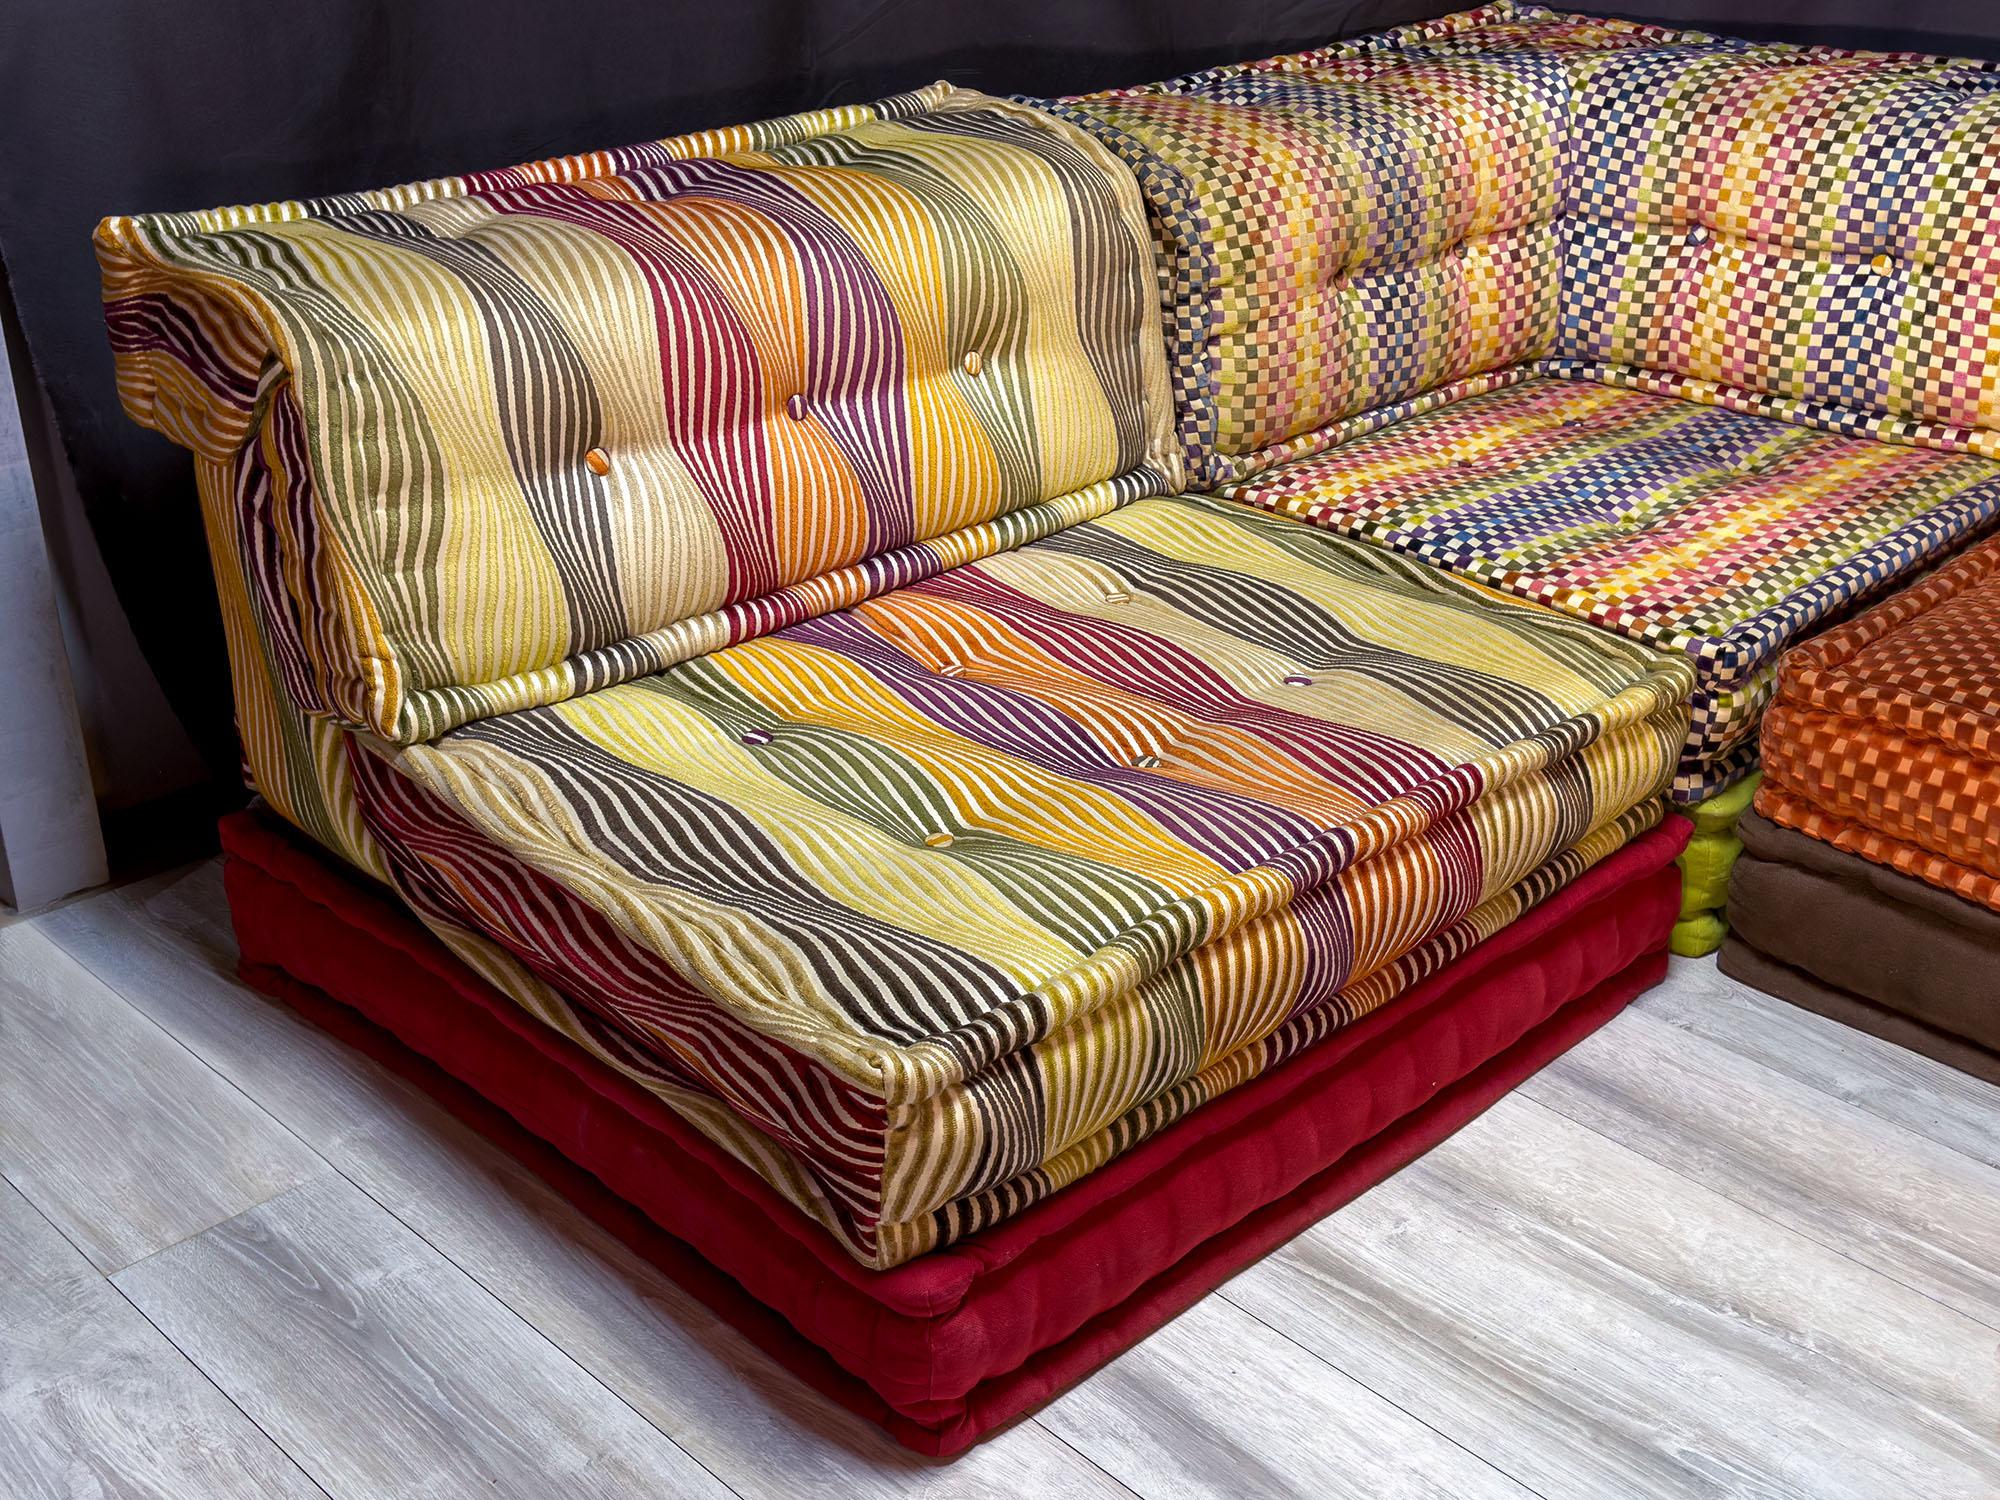 Modern Modular Sofa Mah Jong by Missoni for Roche Bobois, set of 13 pieces, 2000s For Sale